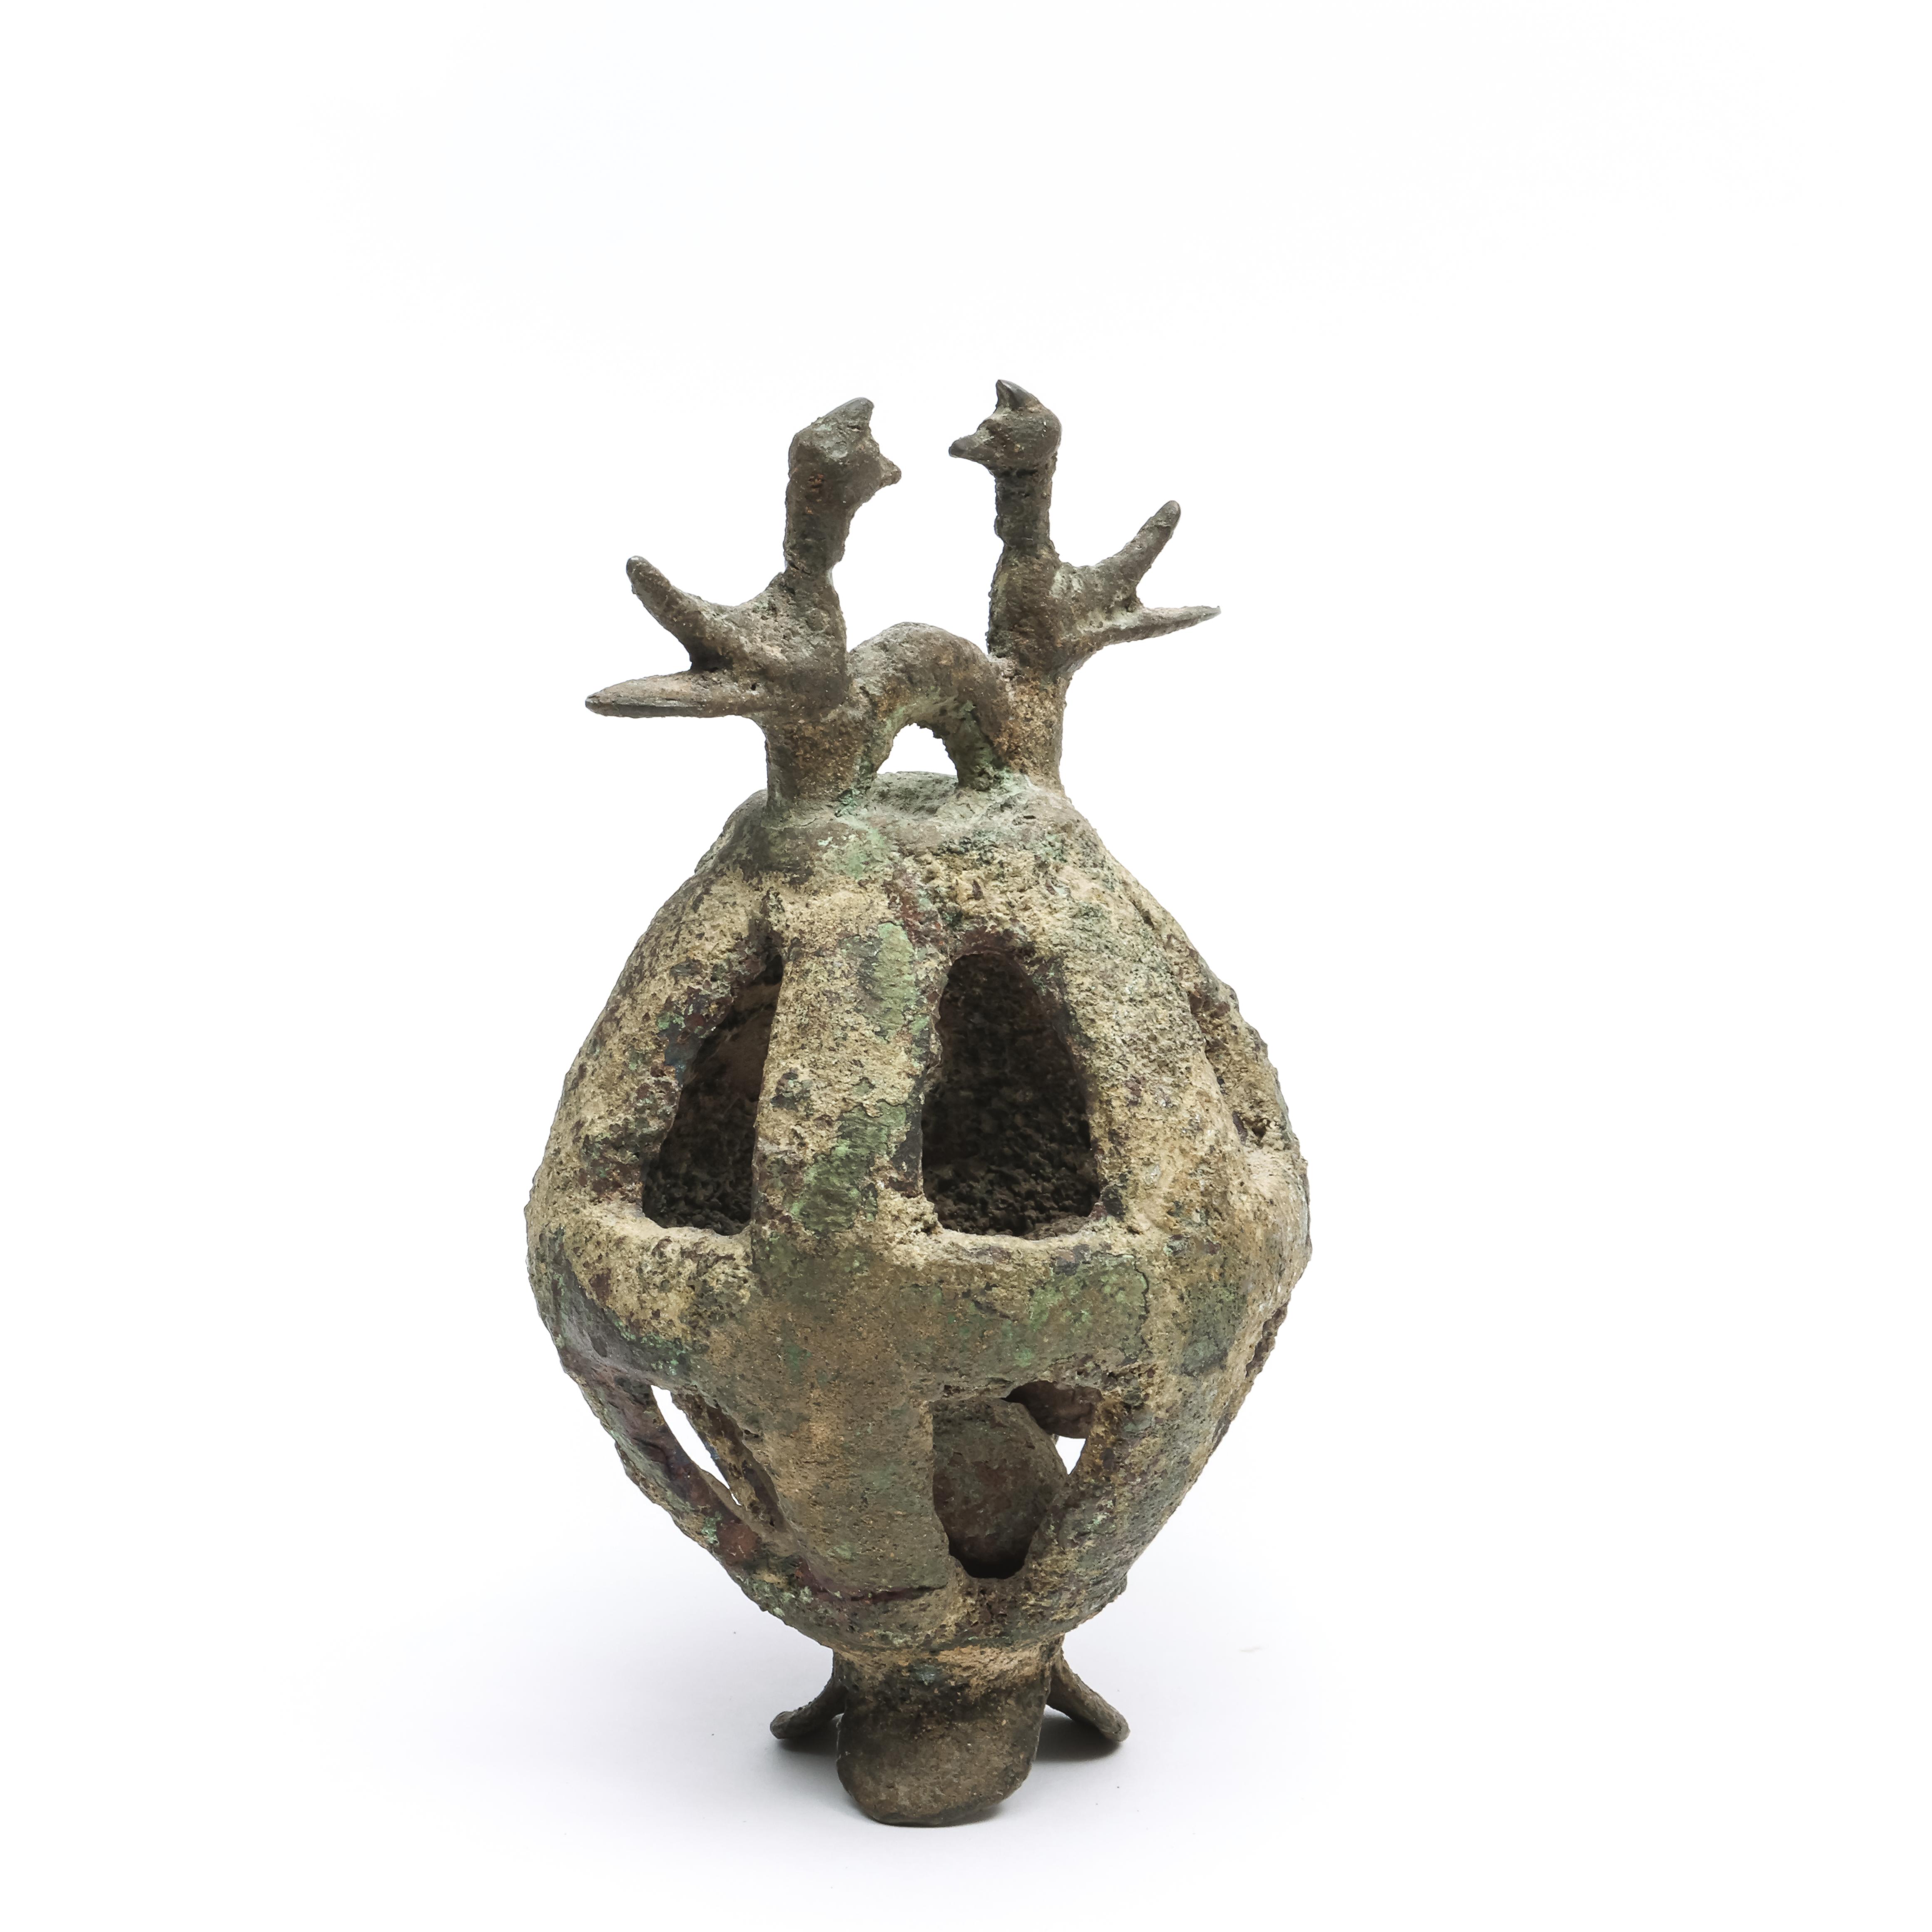 Nothern Persia, Amlash, a bronze open decorative ornament for a horse rein, ca. 11th - 10th century - Image 2 of 2